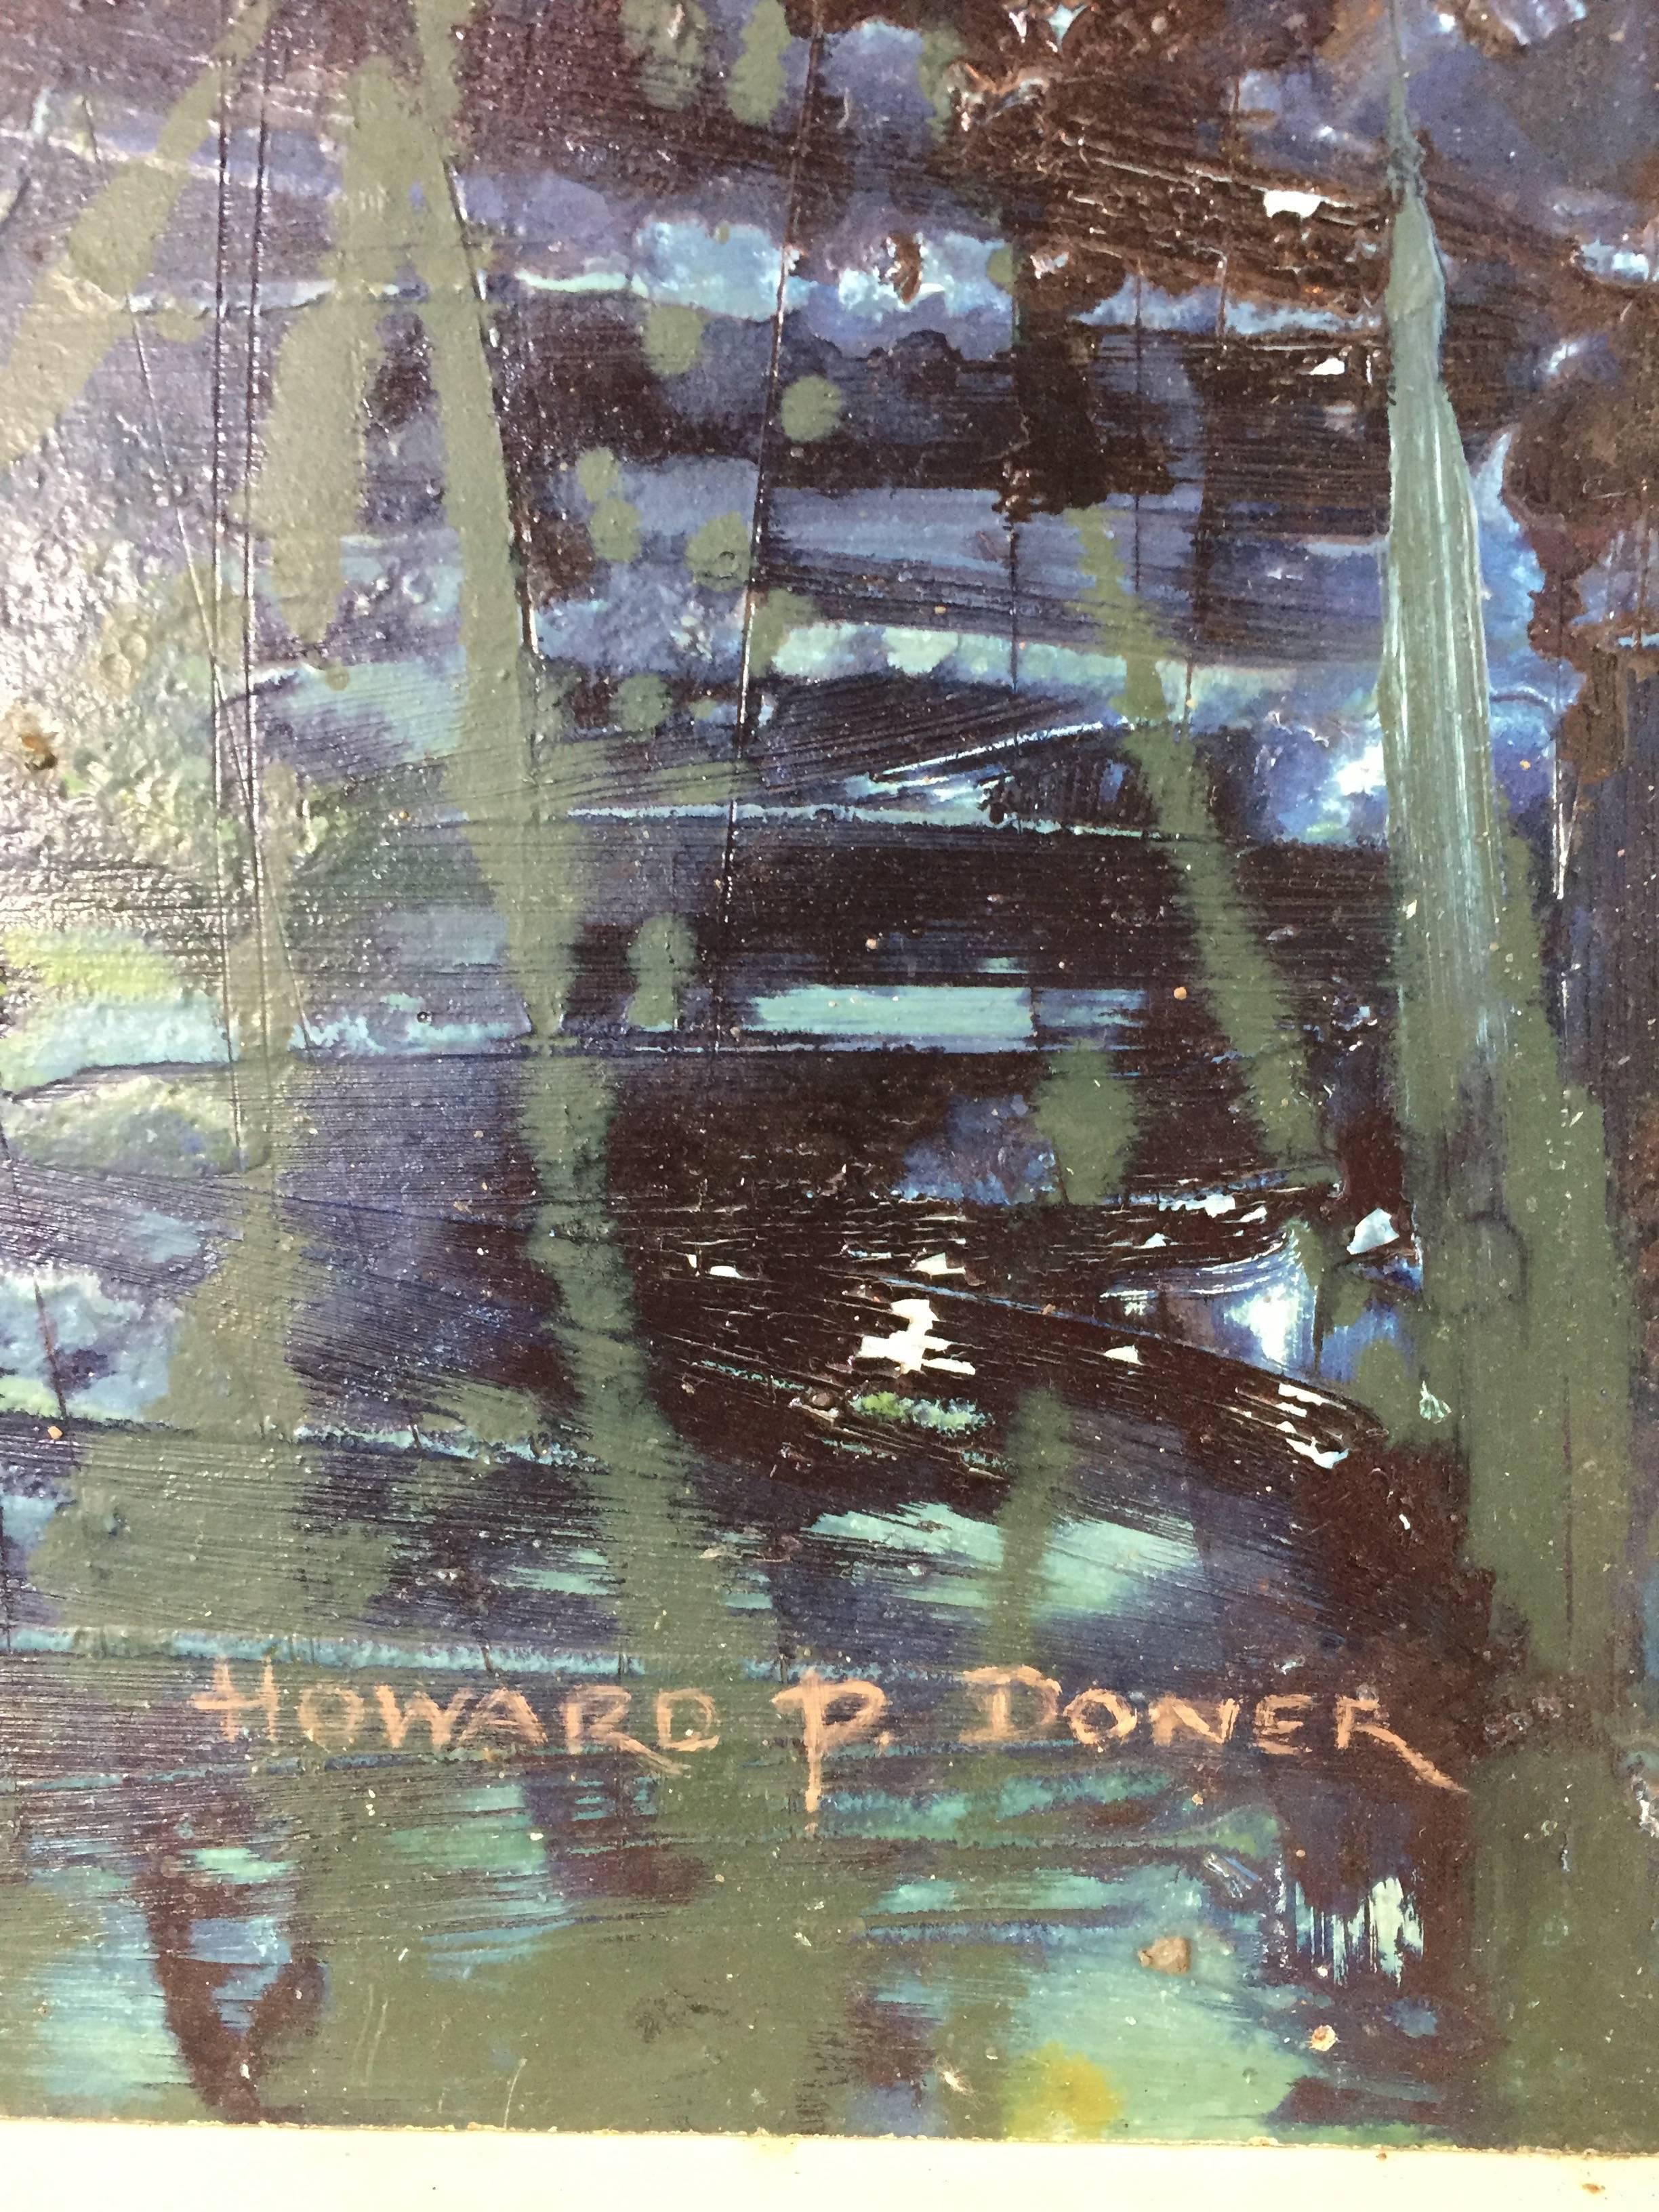 Abstract painting by Canadian artist Howard P. Doner. Includes pops of yellow, blue, and green on a dark base. Dimensions below include frame; frame adds 1/4 inch to each side and is 2.75 in deep, making the dimensions without frame 34.75 in W x